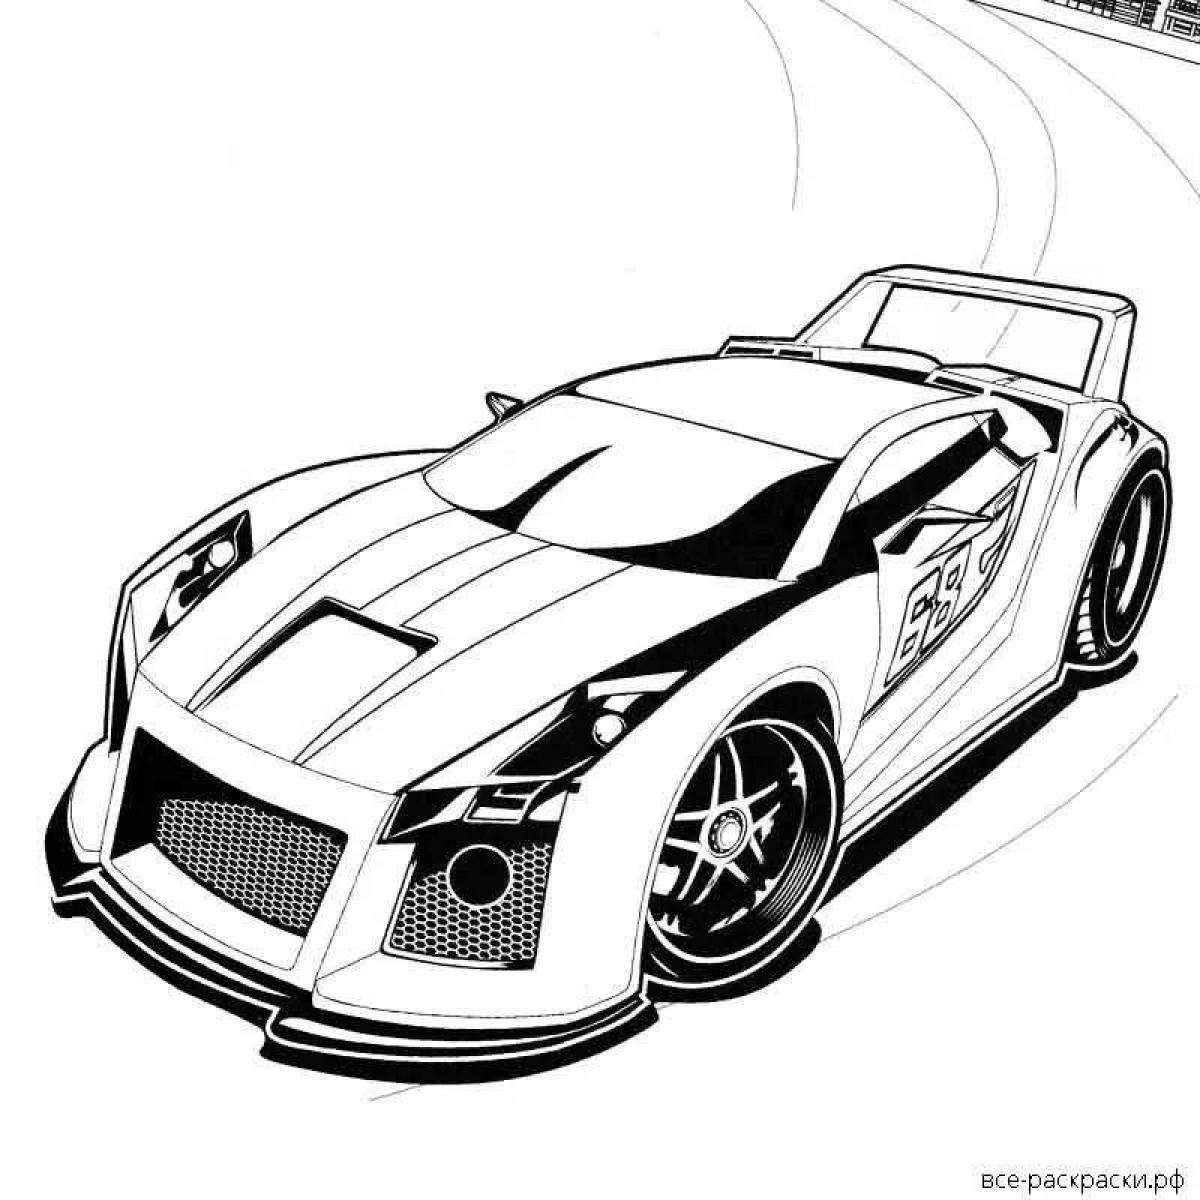 Fascinating hot wheels coloring book for boys